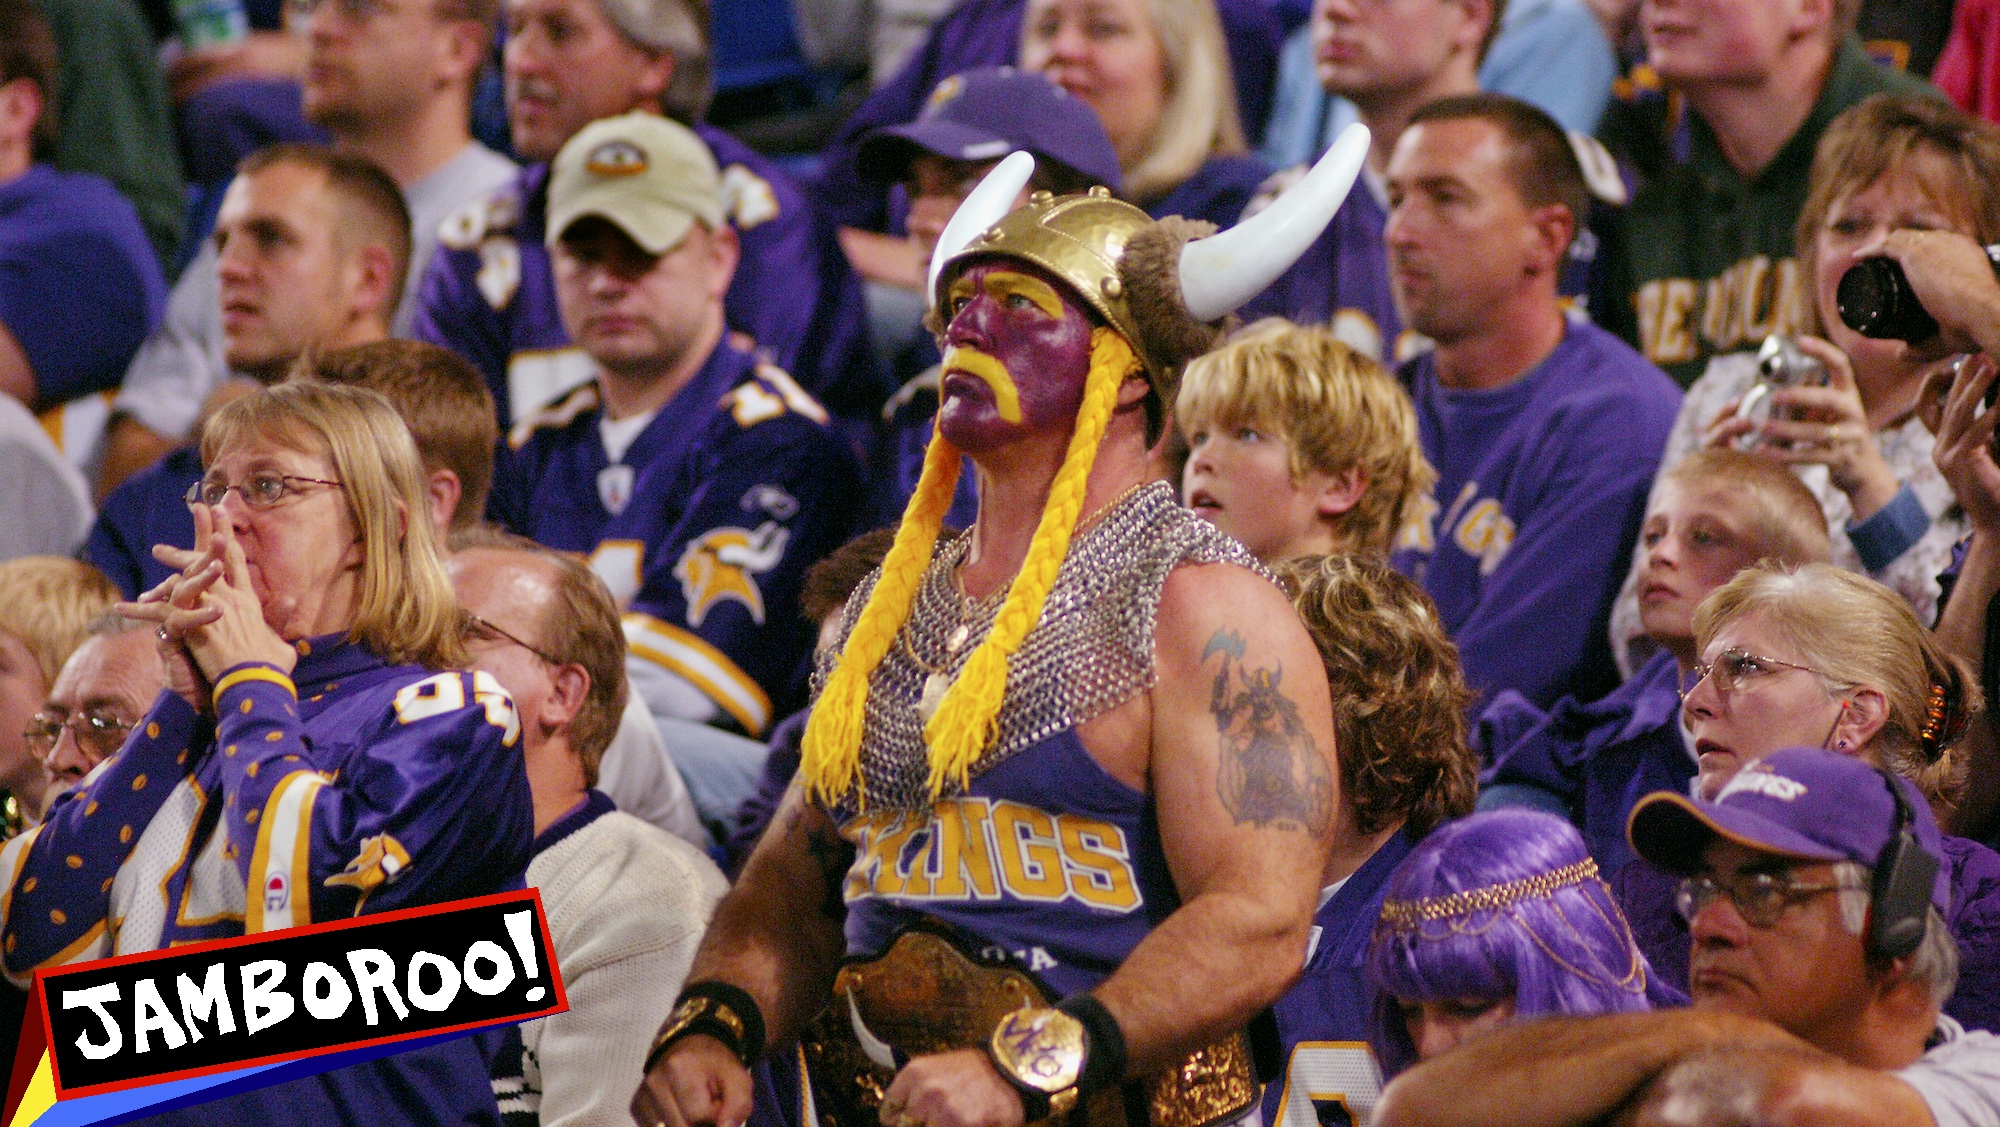 Minnesota Vikings fan dressed up in Viking costume at a National Football League game in the Humphrey Metrodome in Minneapolis, Minnesota. (Photo by LAYNE KENNEDY/Corbis via Getty Images)